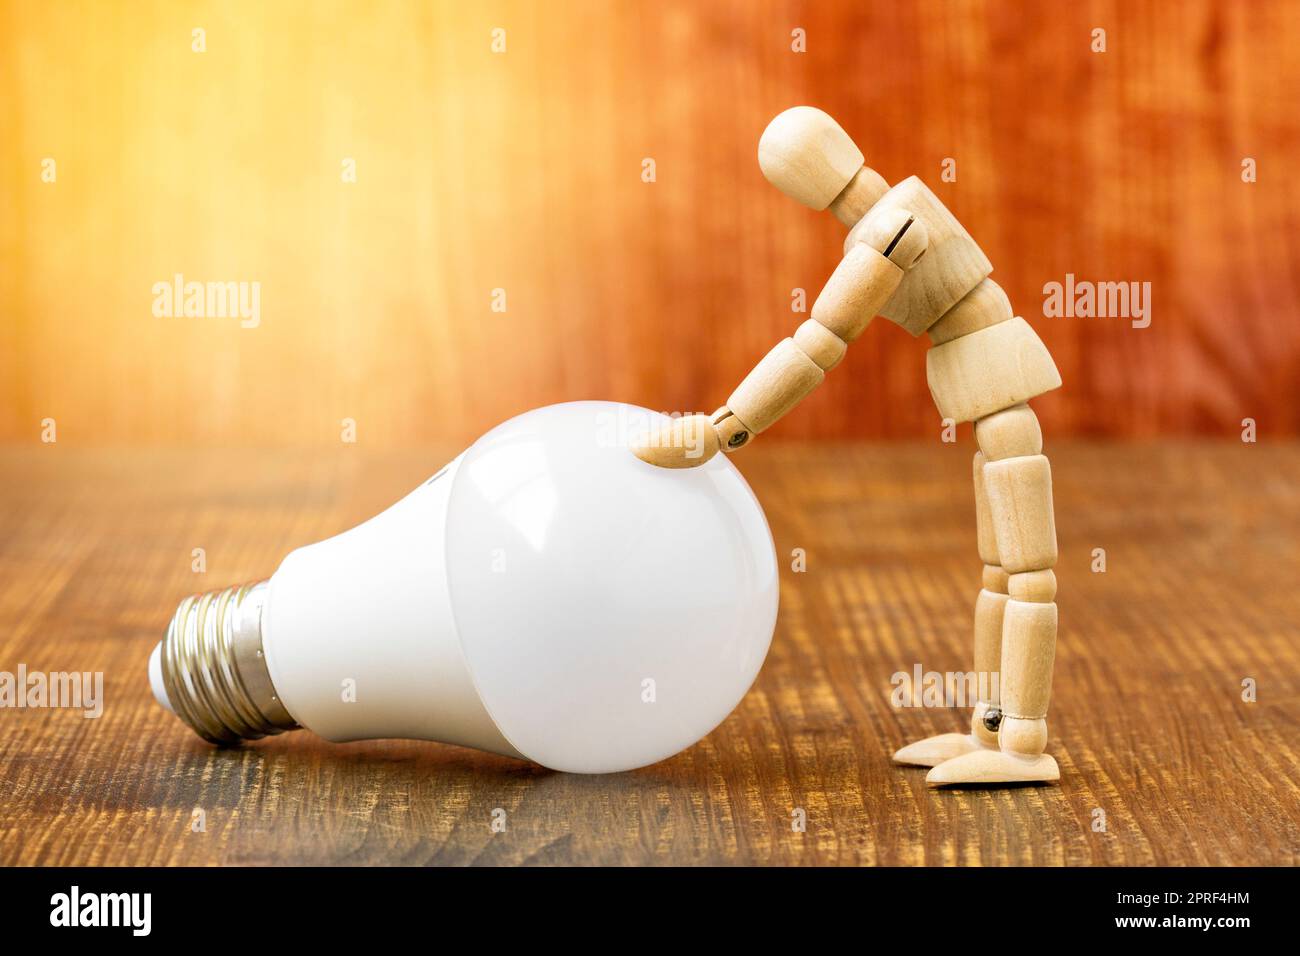 Wooden dummy with LED light bulb on wooden background Stock Photo